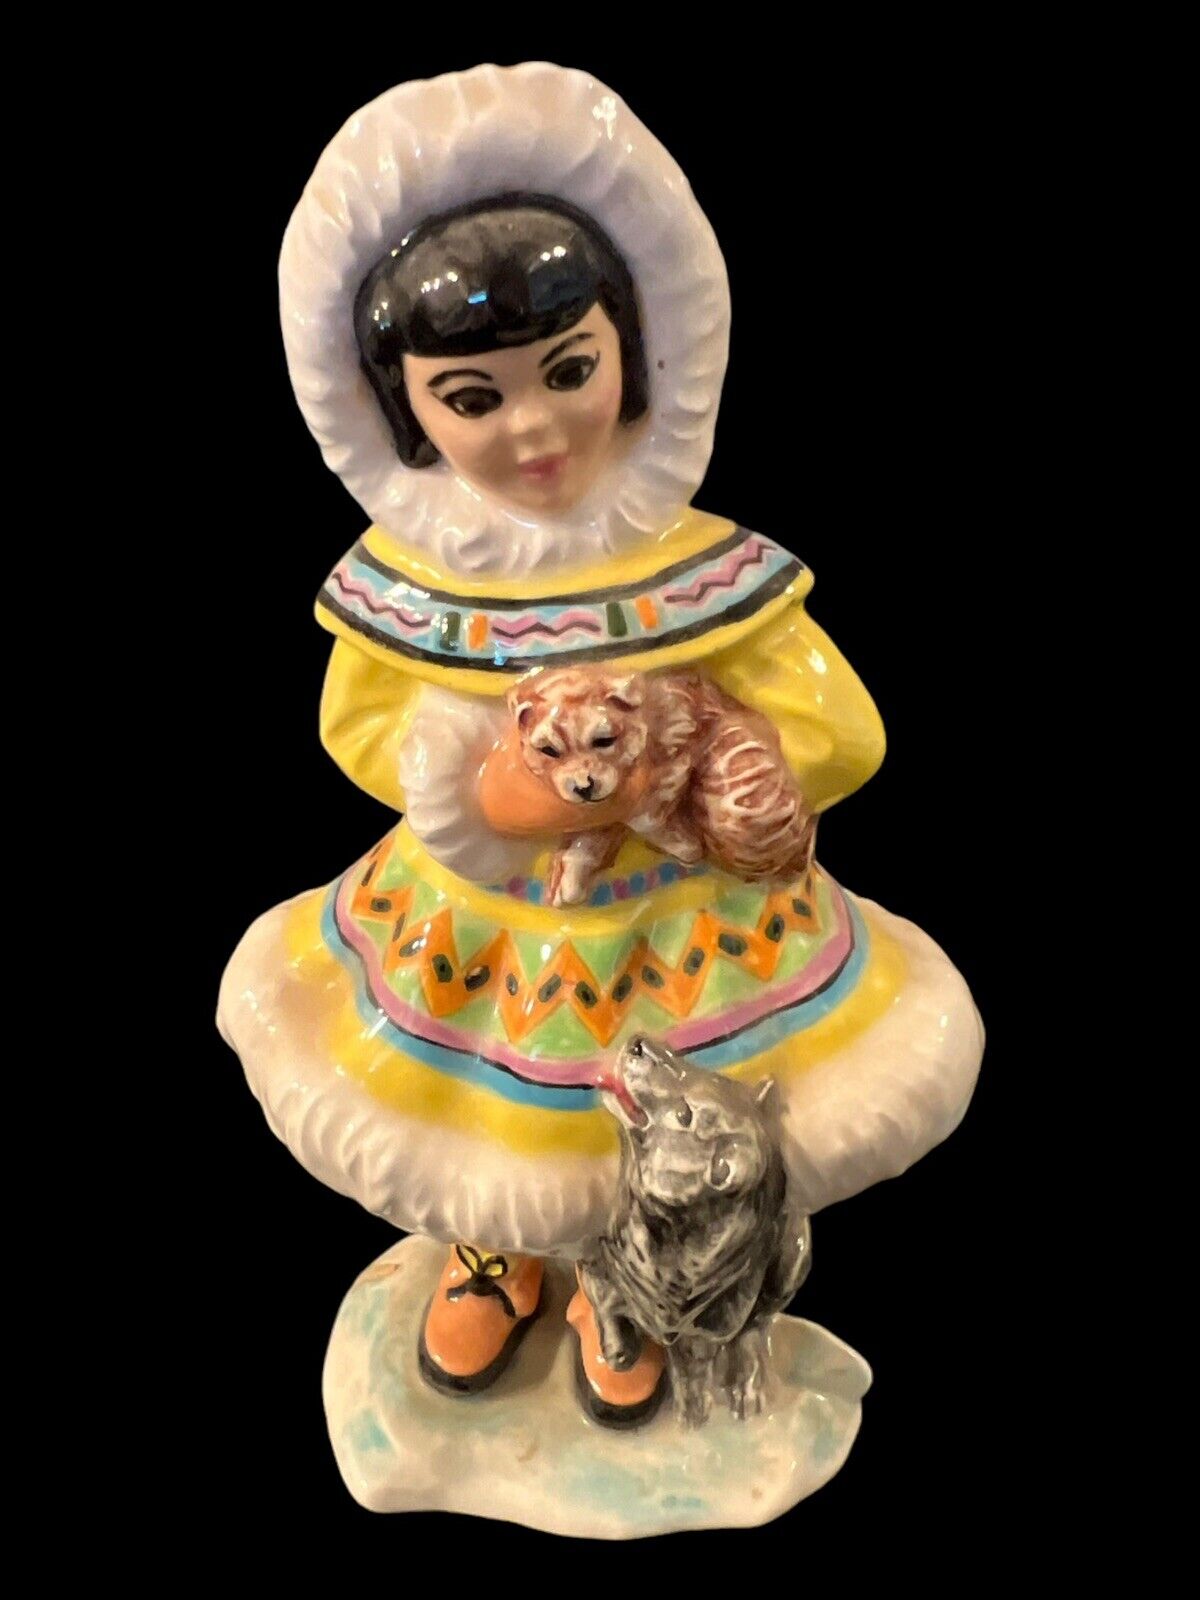 VTG Eskimo Girl Ceramic Sculpture Cute Indigenous Woman Hand Painted W/ Wolf